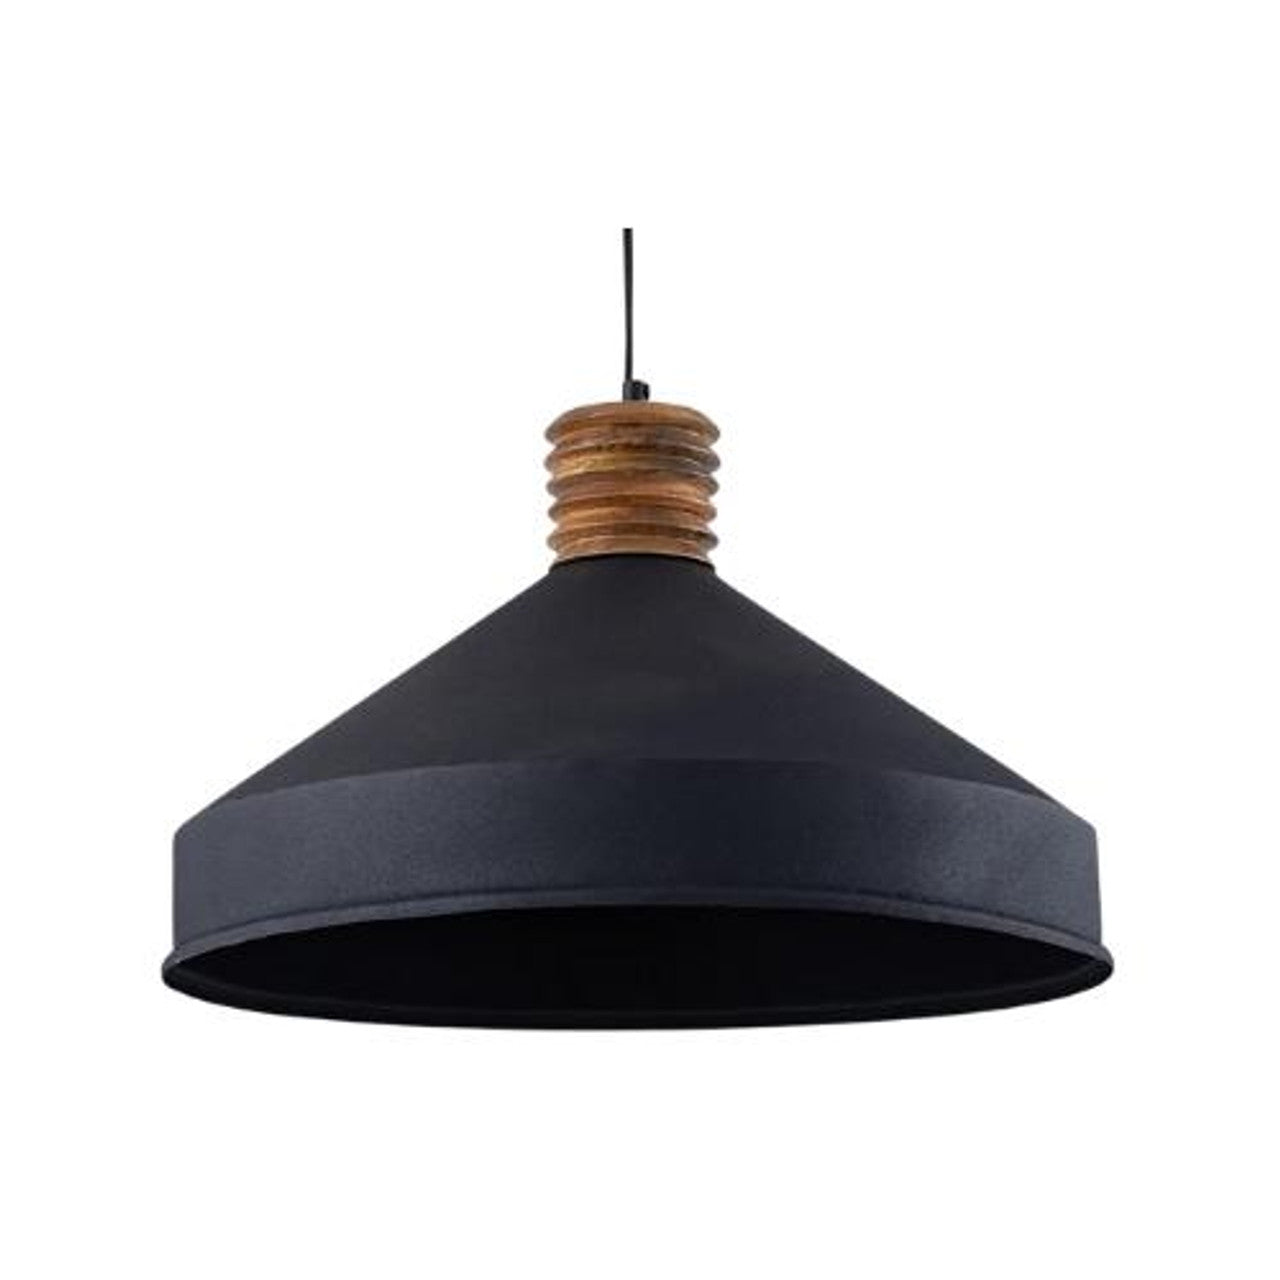 Excelsior Black & Wood Pendant Light (Launch Special) - Future Light - LED Lights South Africa